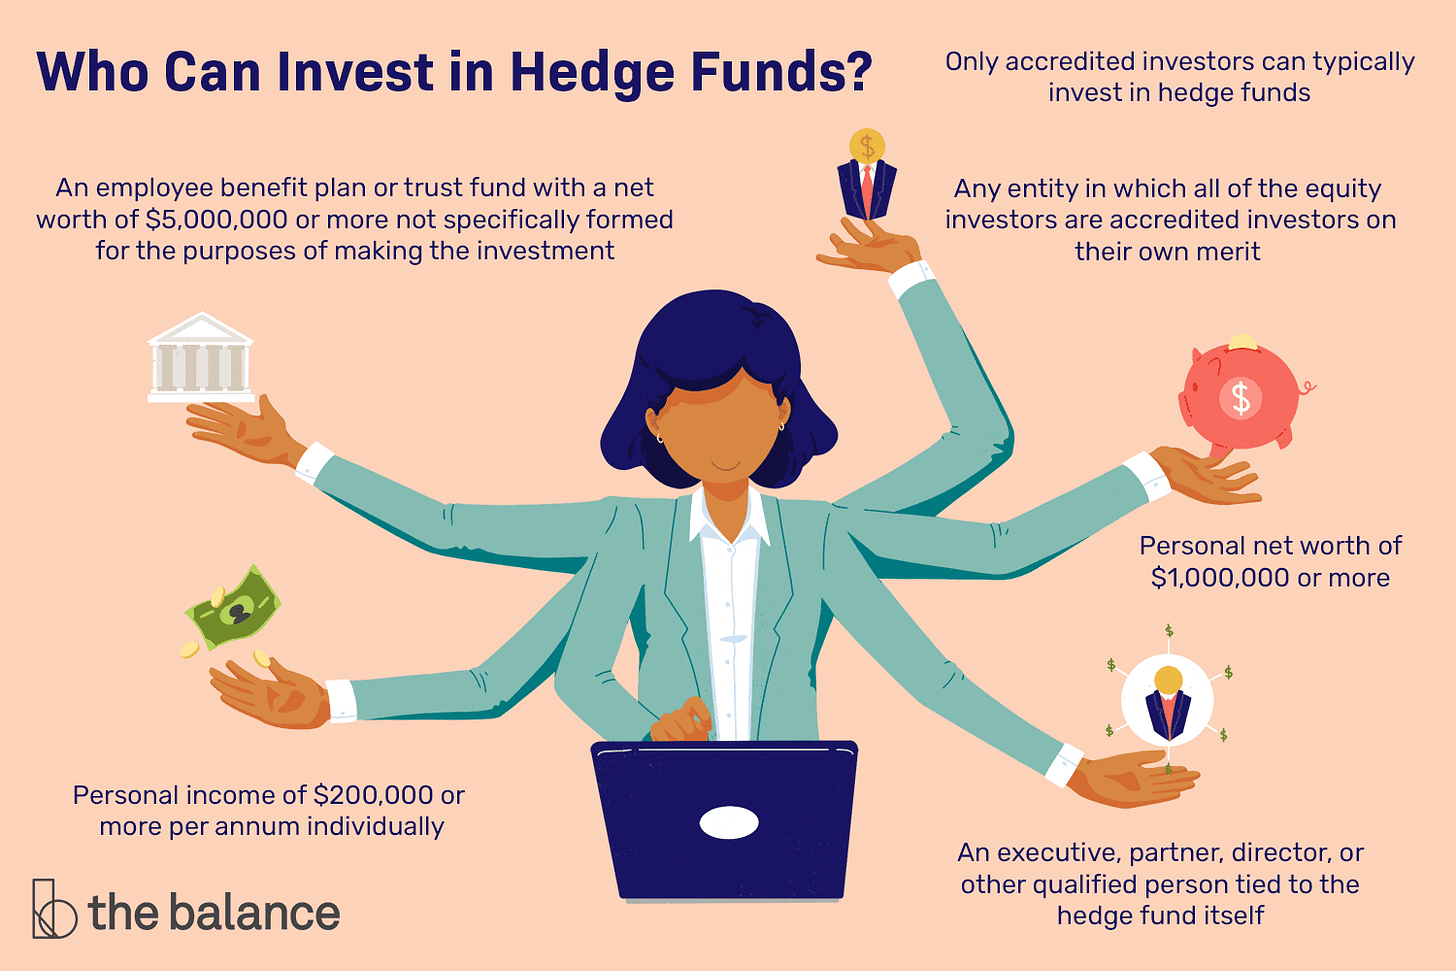 What Is a Hedge Fund?